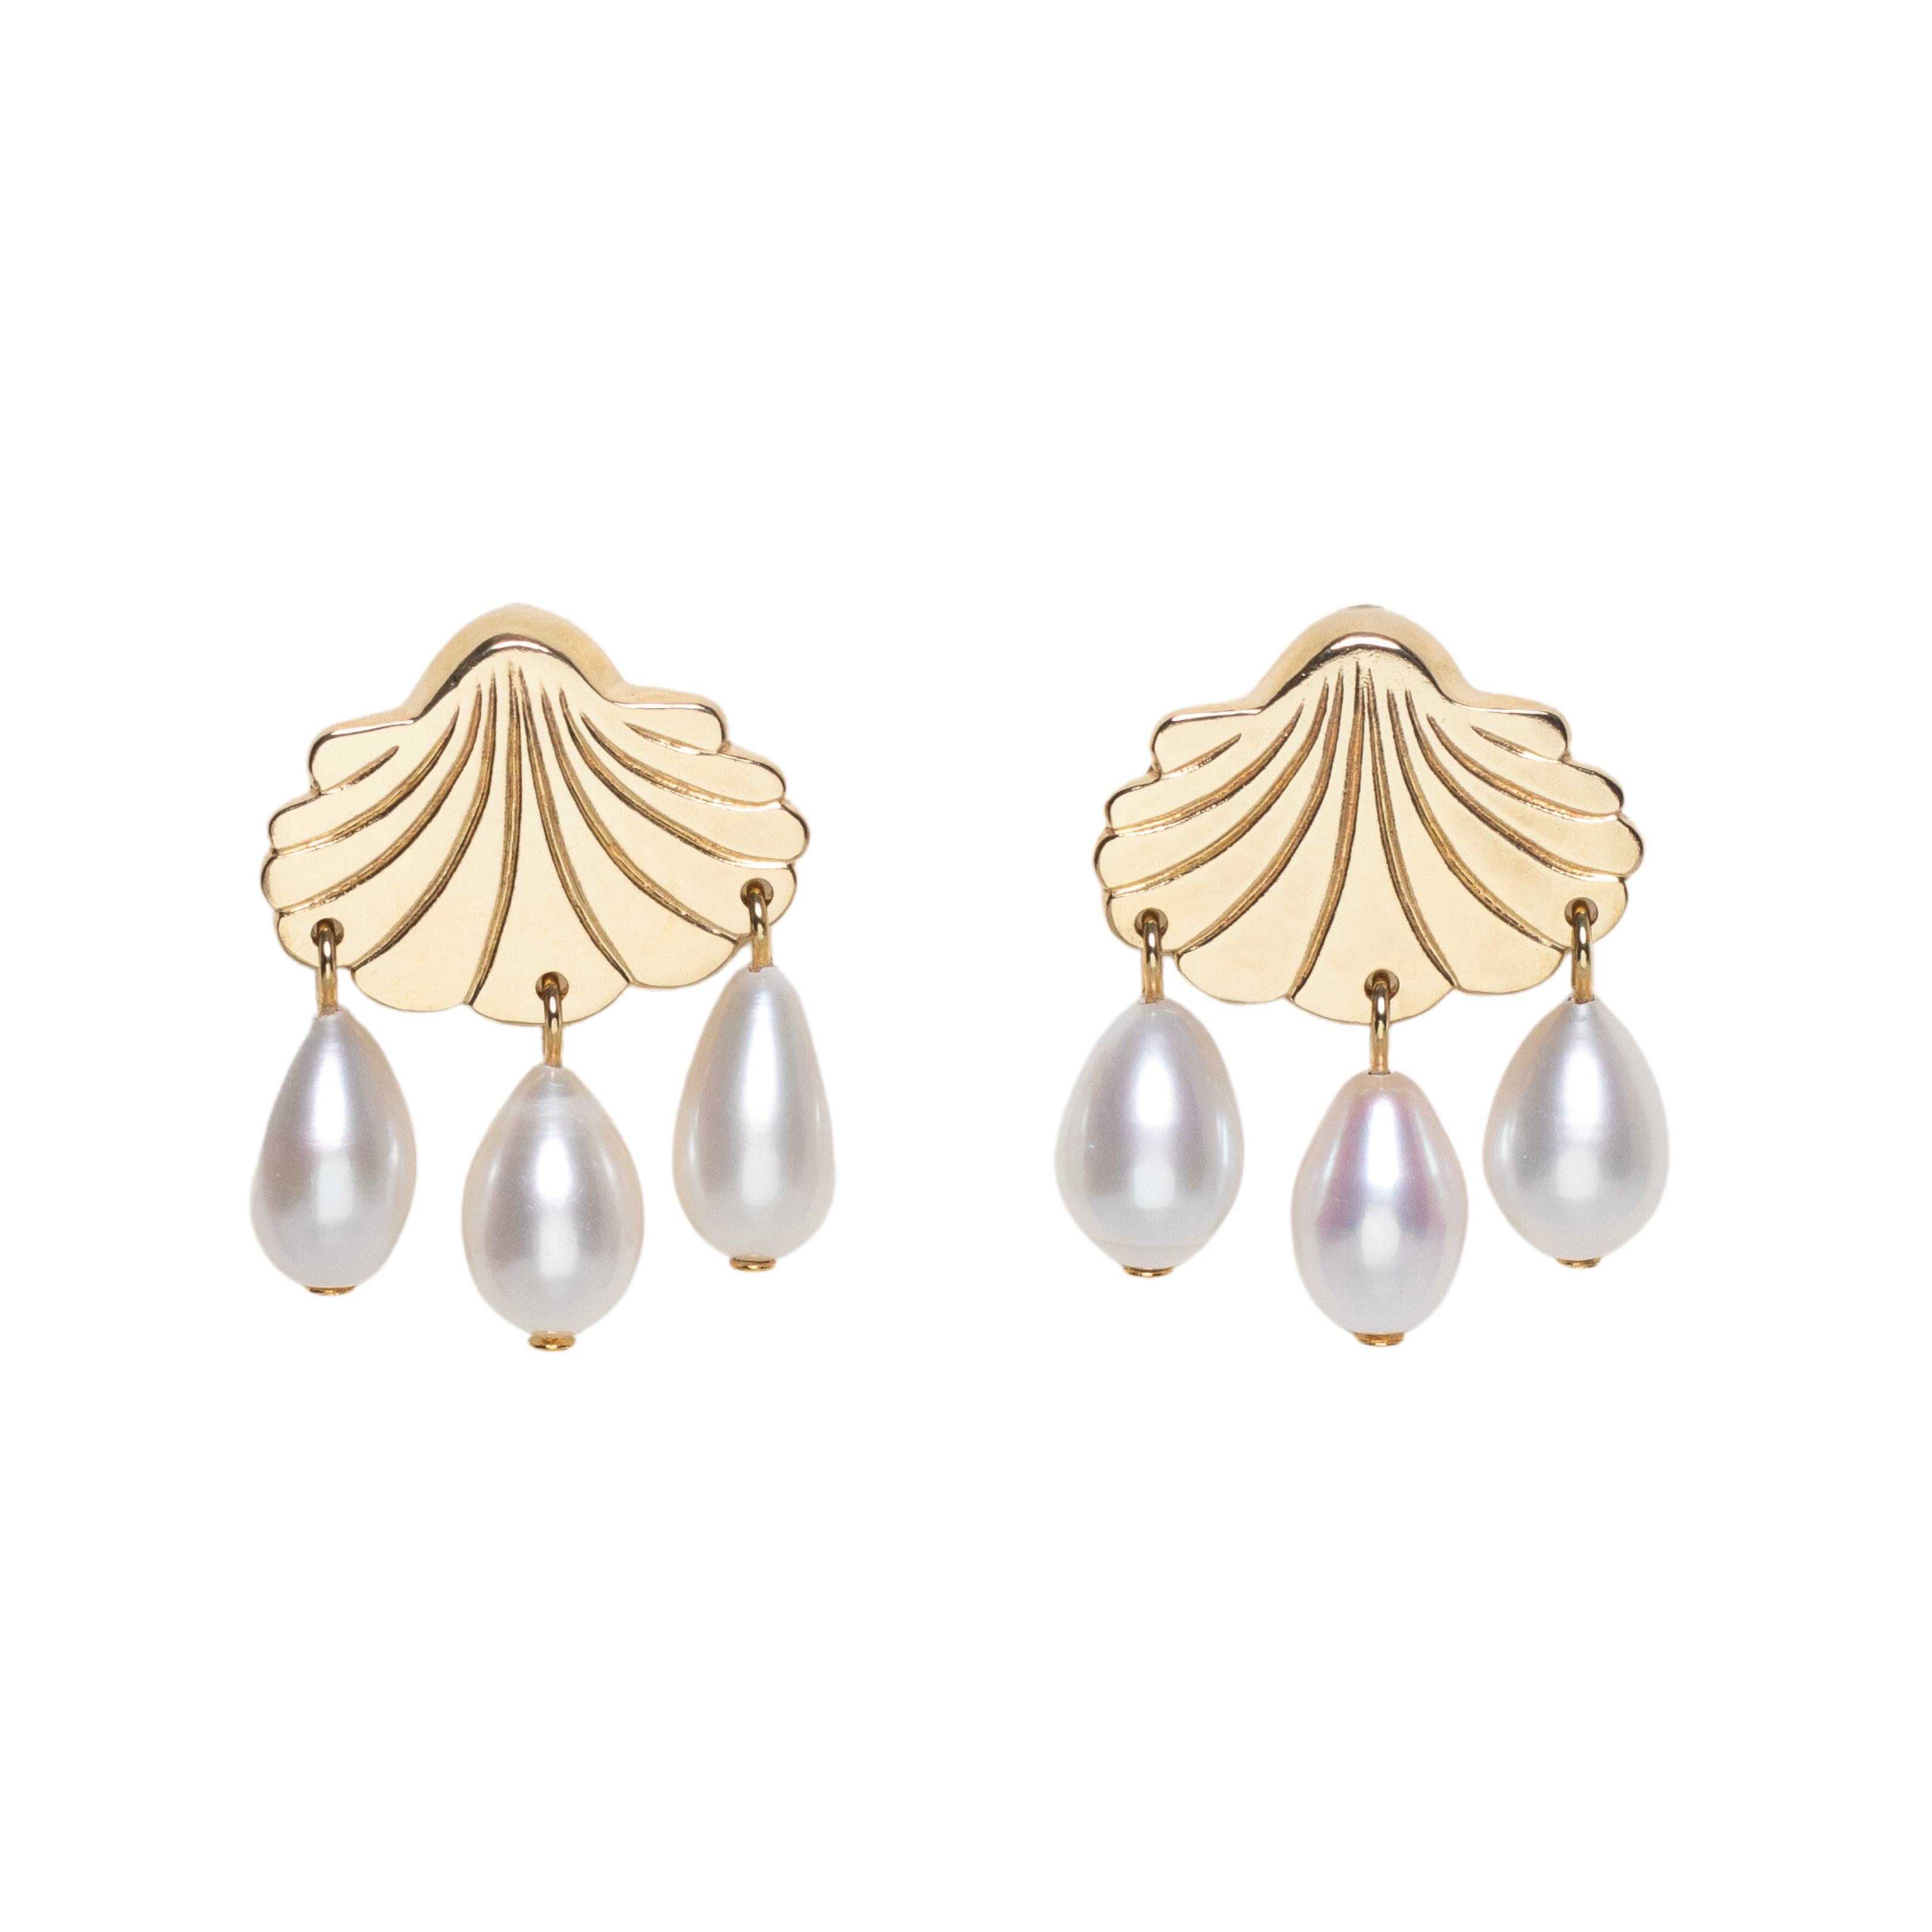 The Grande Coquille Earrings